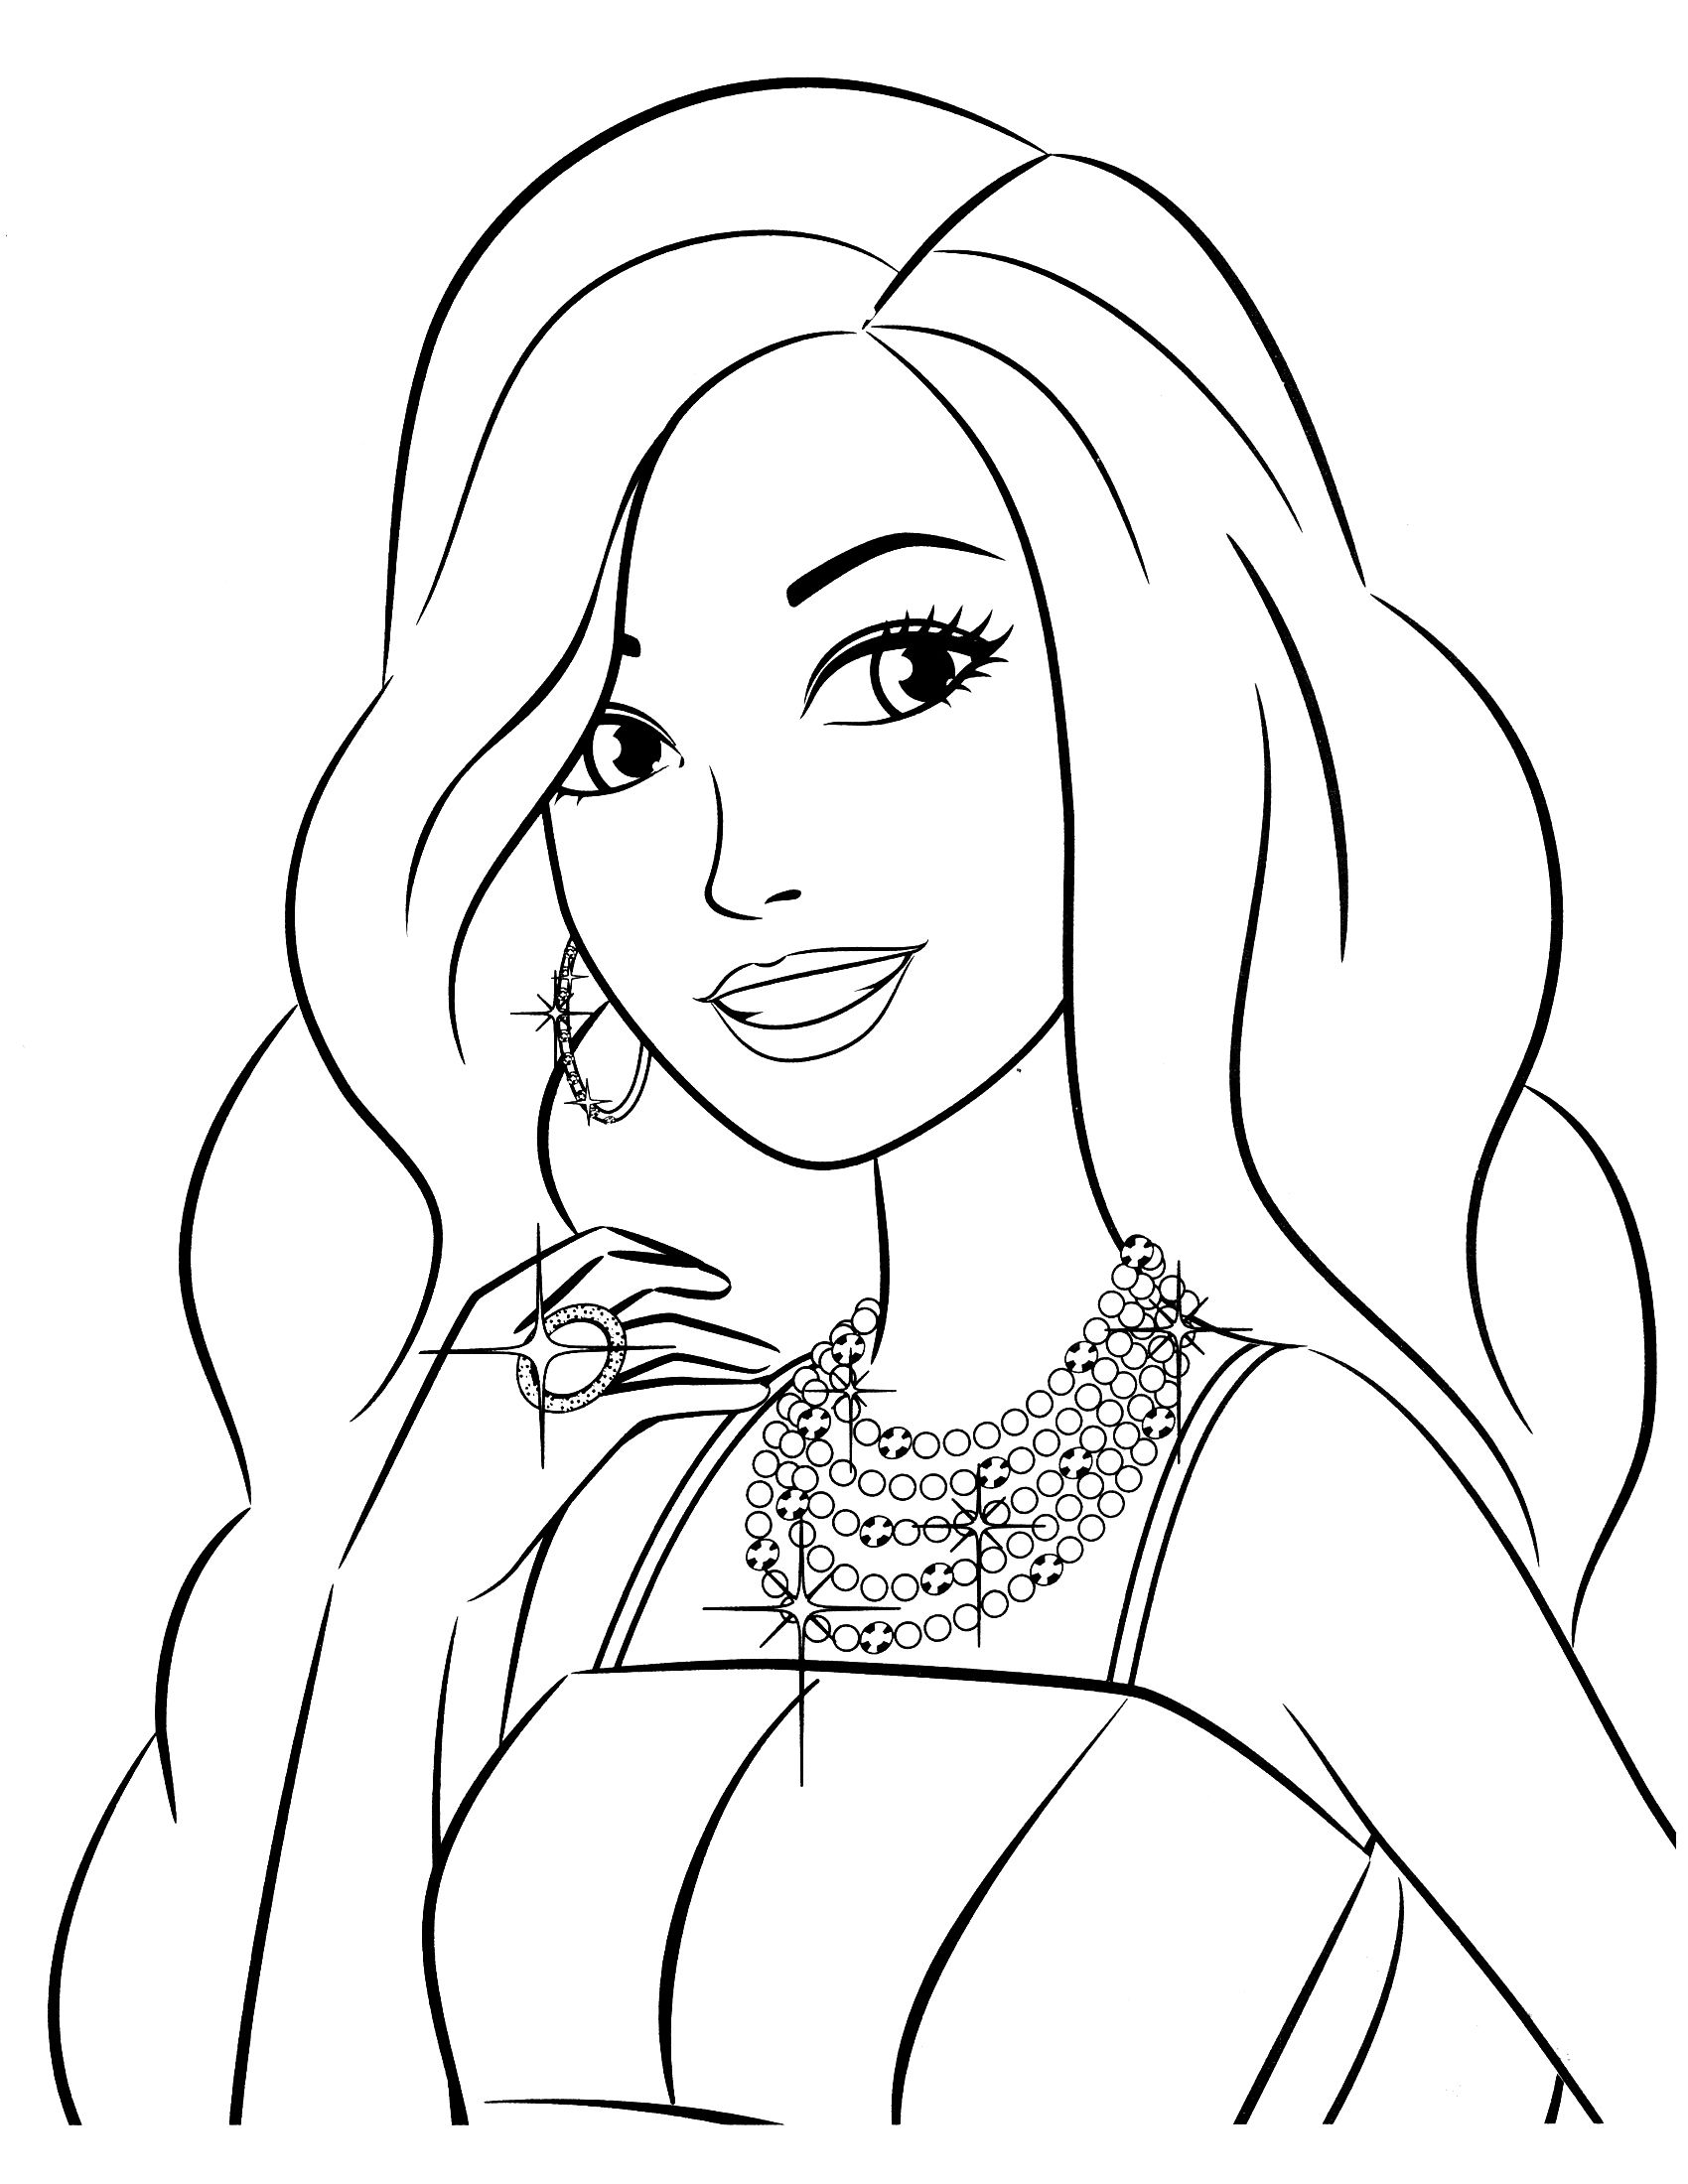 Barbie clipart black and white. With coloring pages online